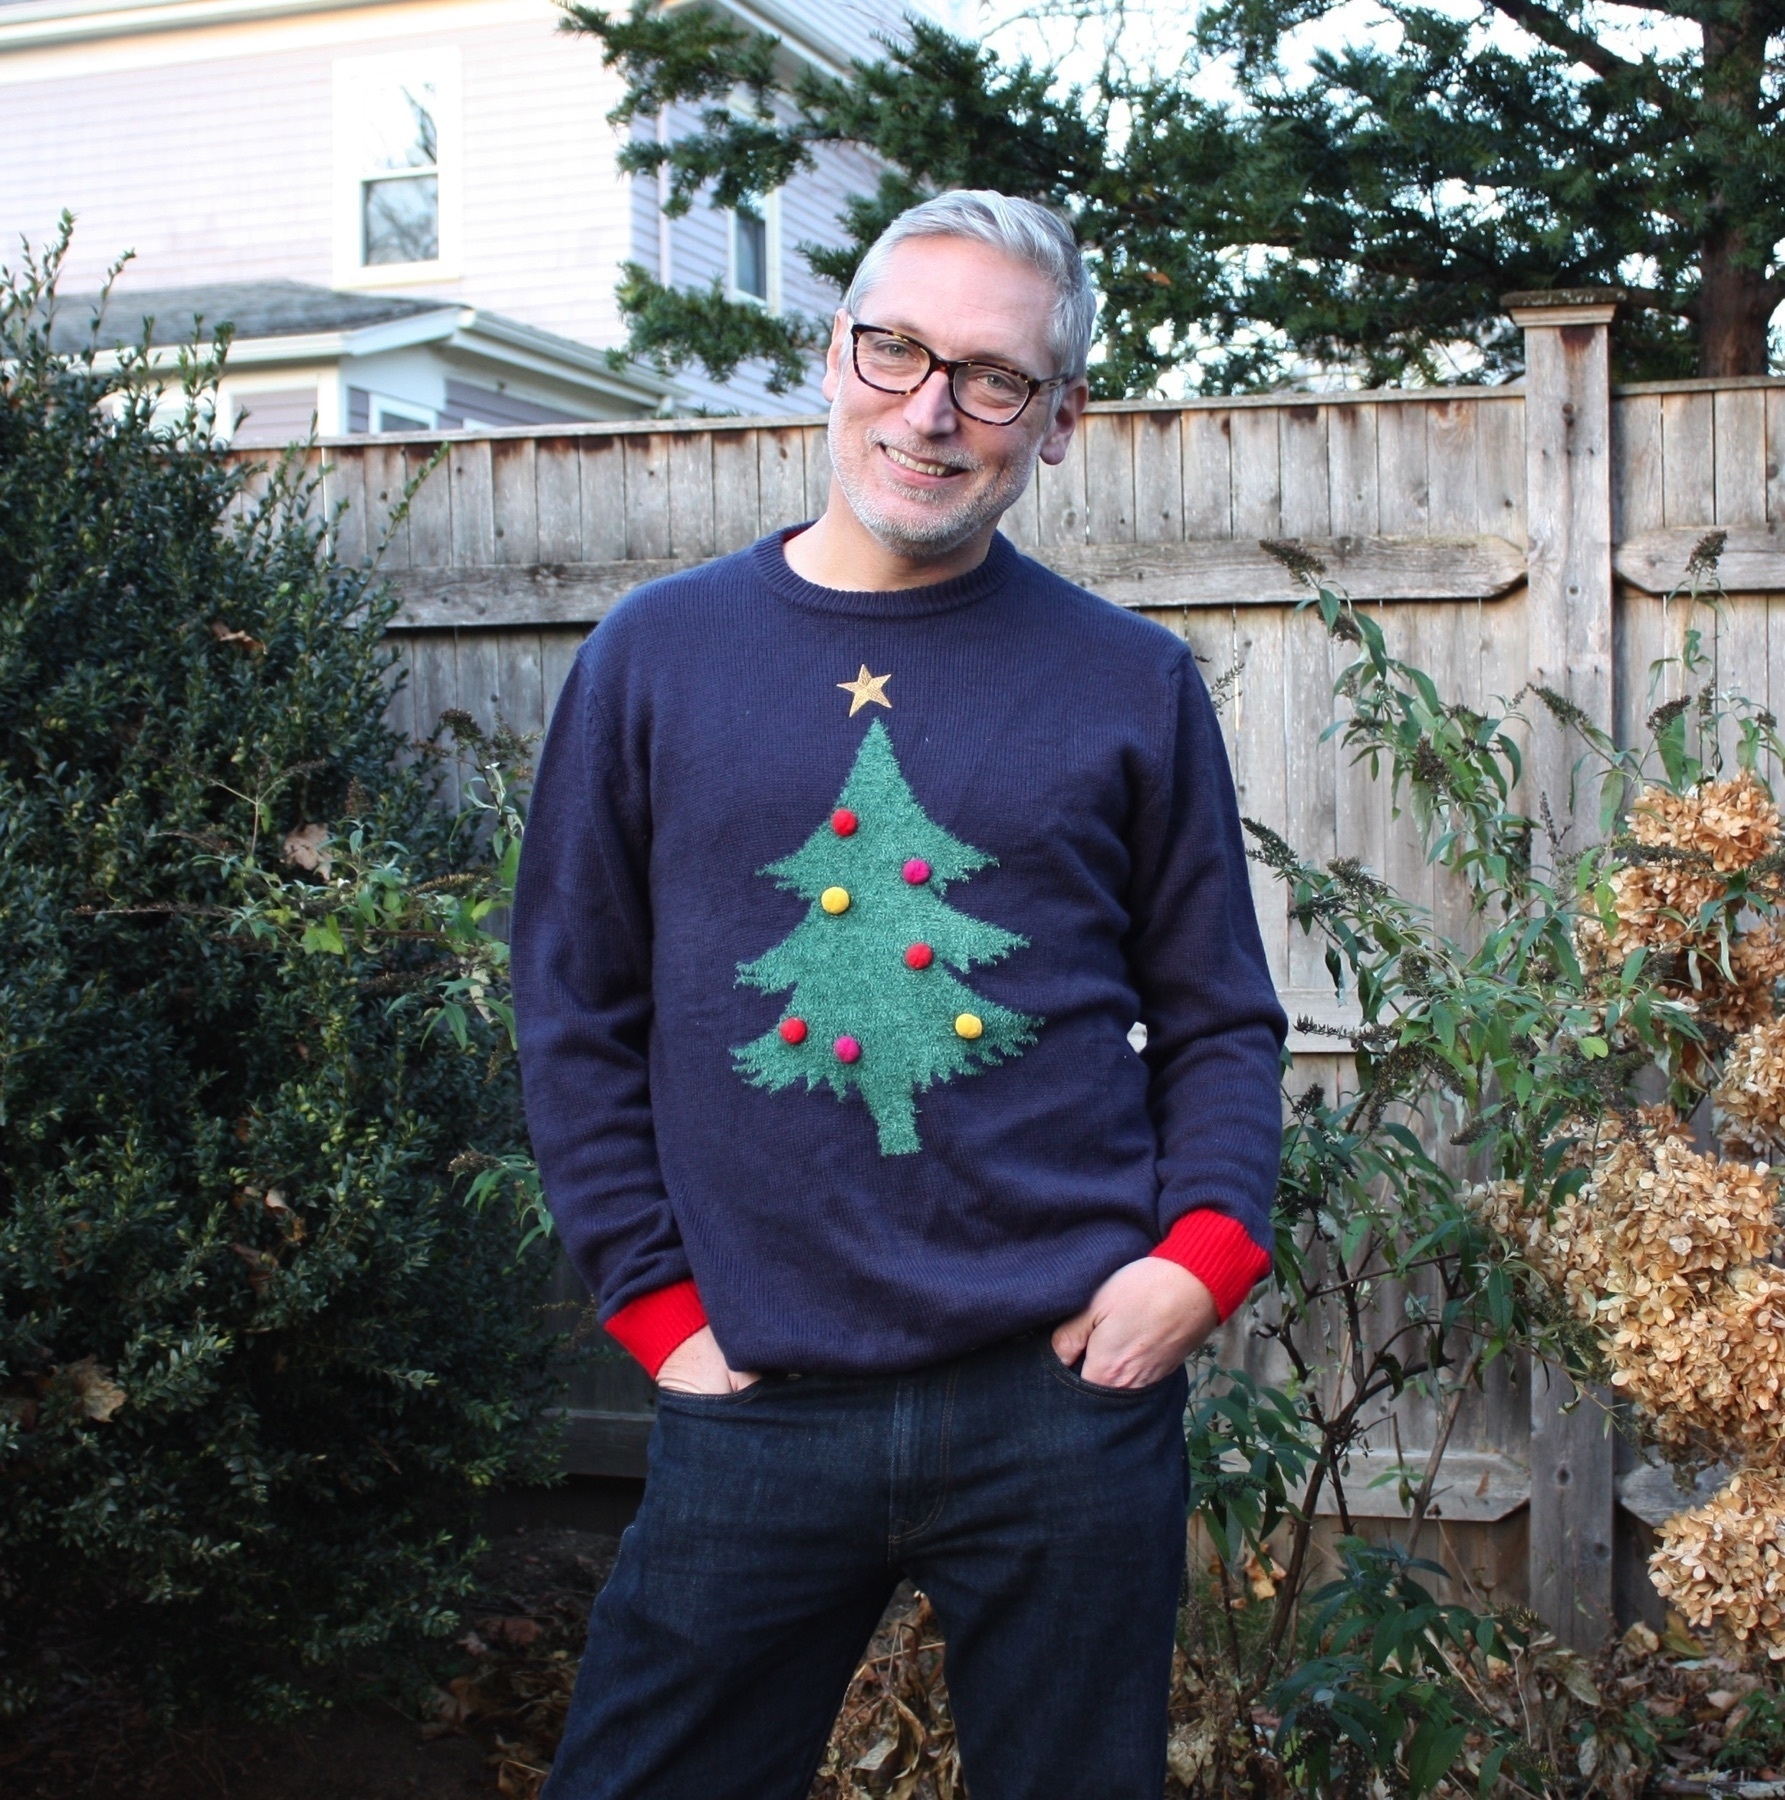 Picture of me outdoors wearing a Christmas tree novelty sweater, standing with weight shifted to one leg and hands in pockets.